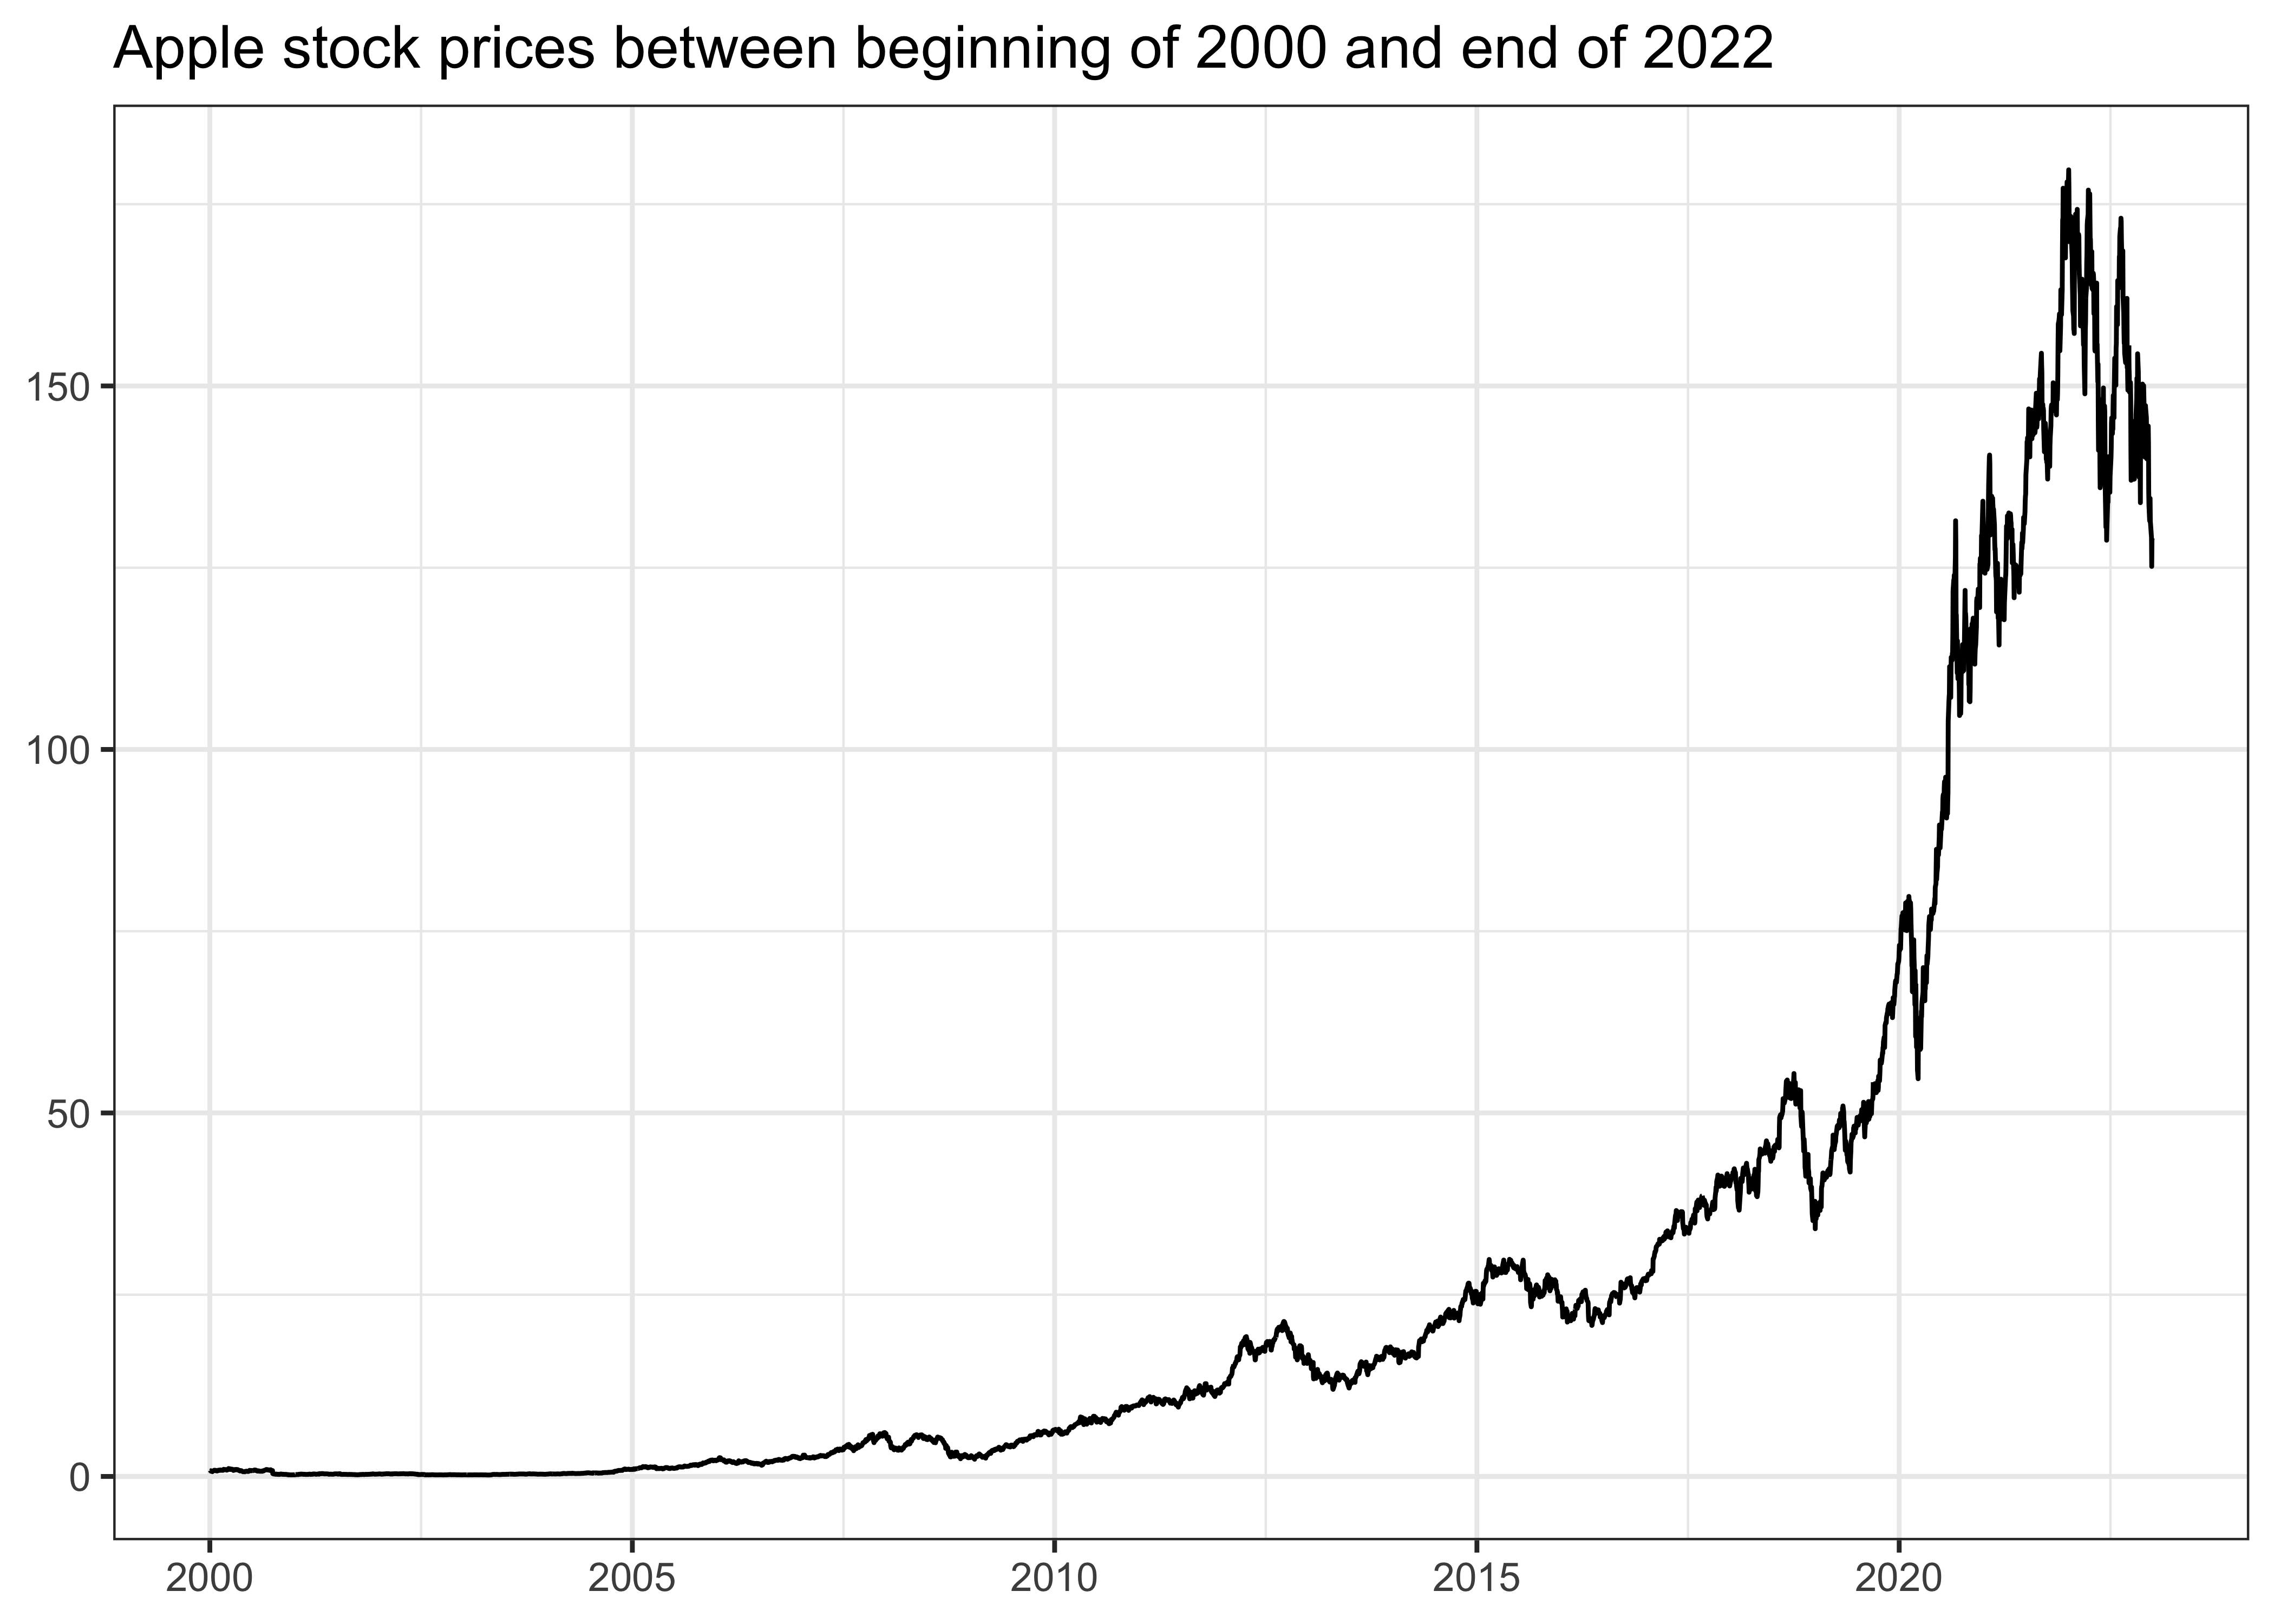 Title: Apple stock prices between the beginning of 2000 and the end of 2021. The figure shows that the stock price of Apple increased dramatically from about 1 USD to around 125 USD.